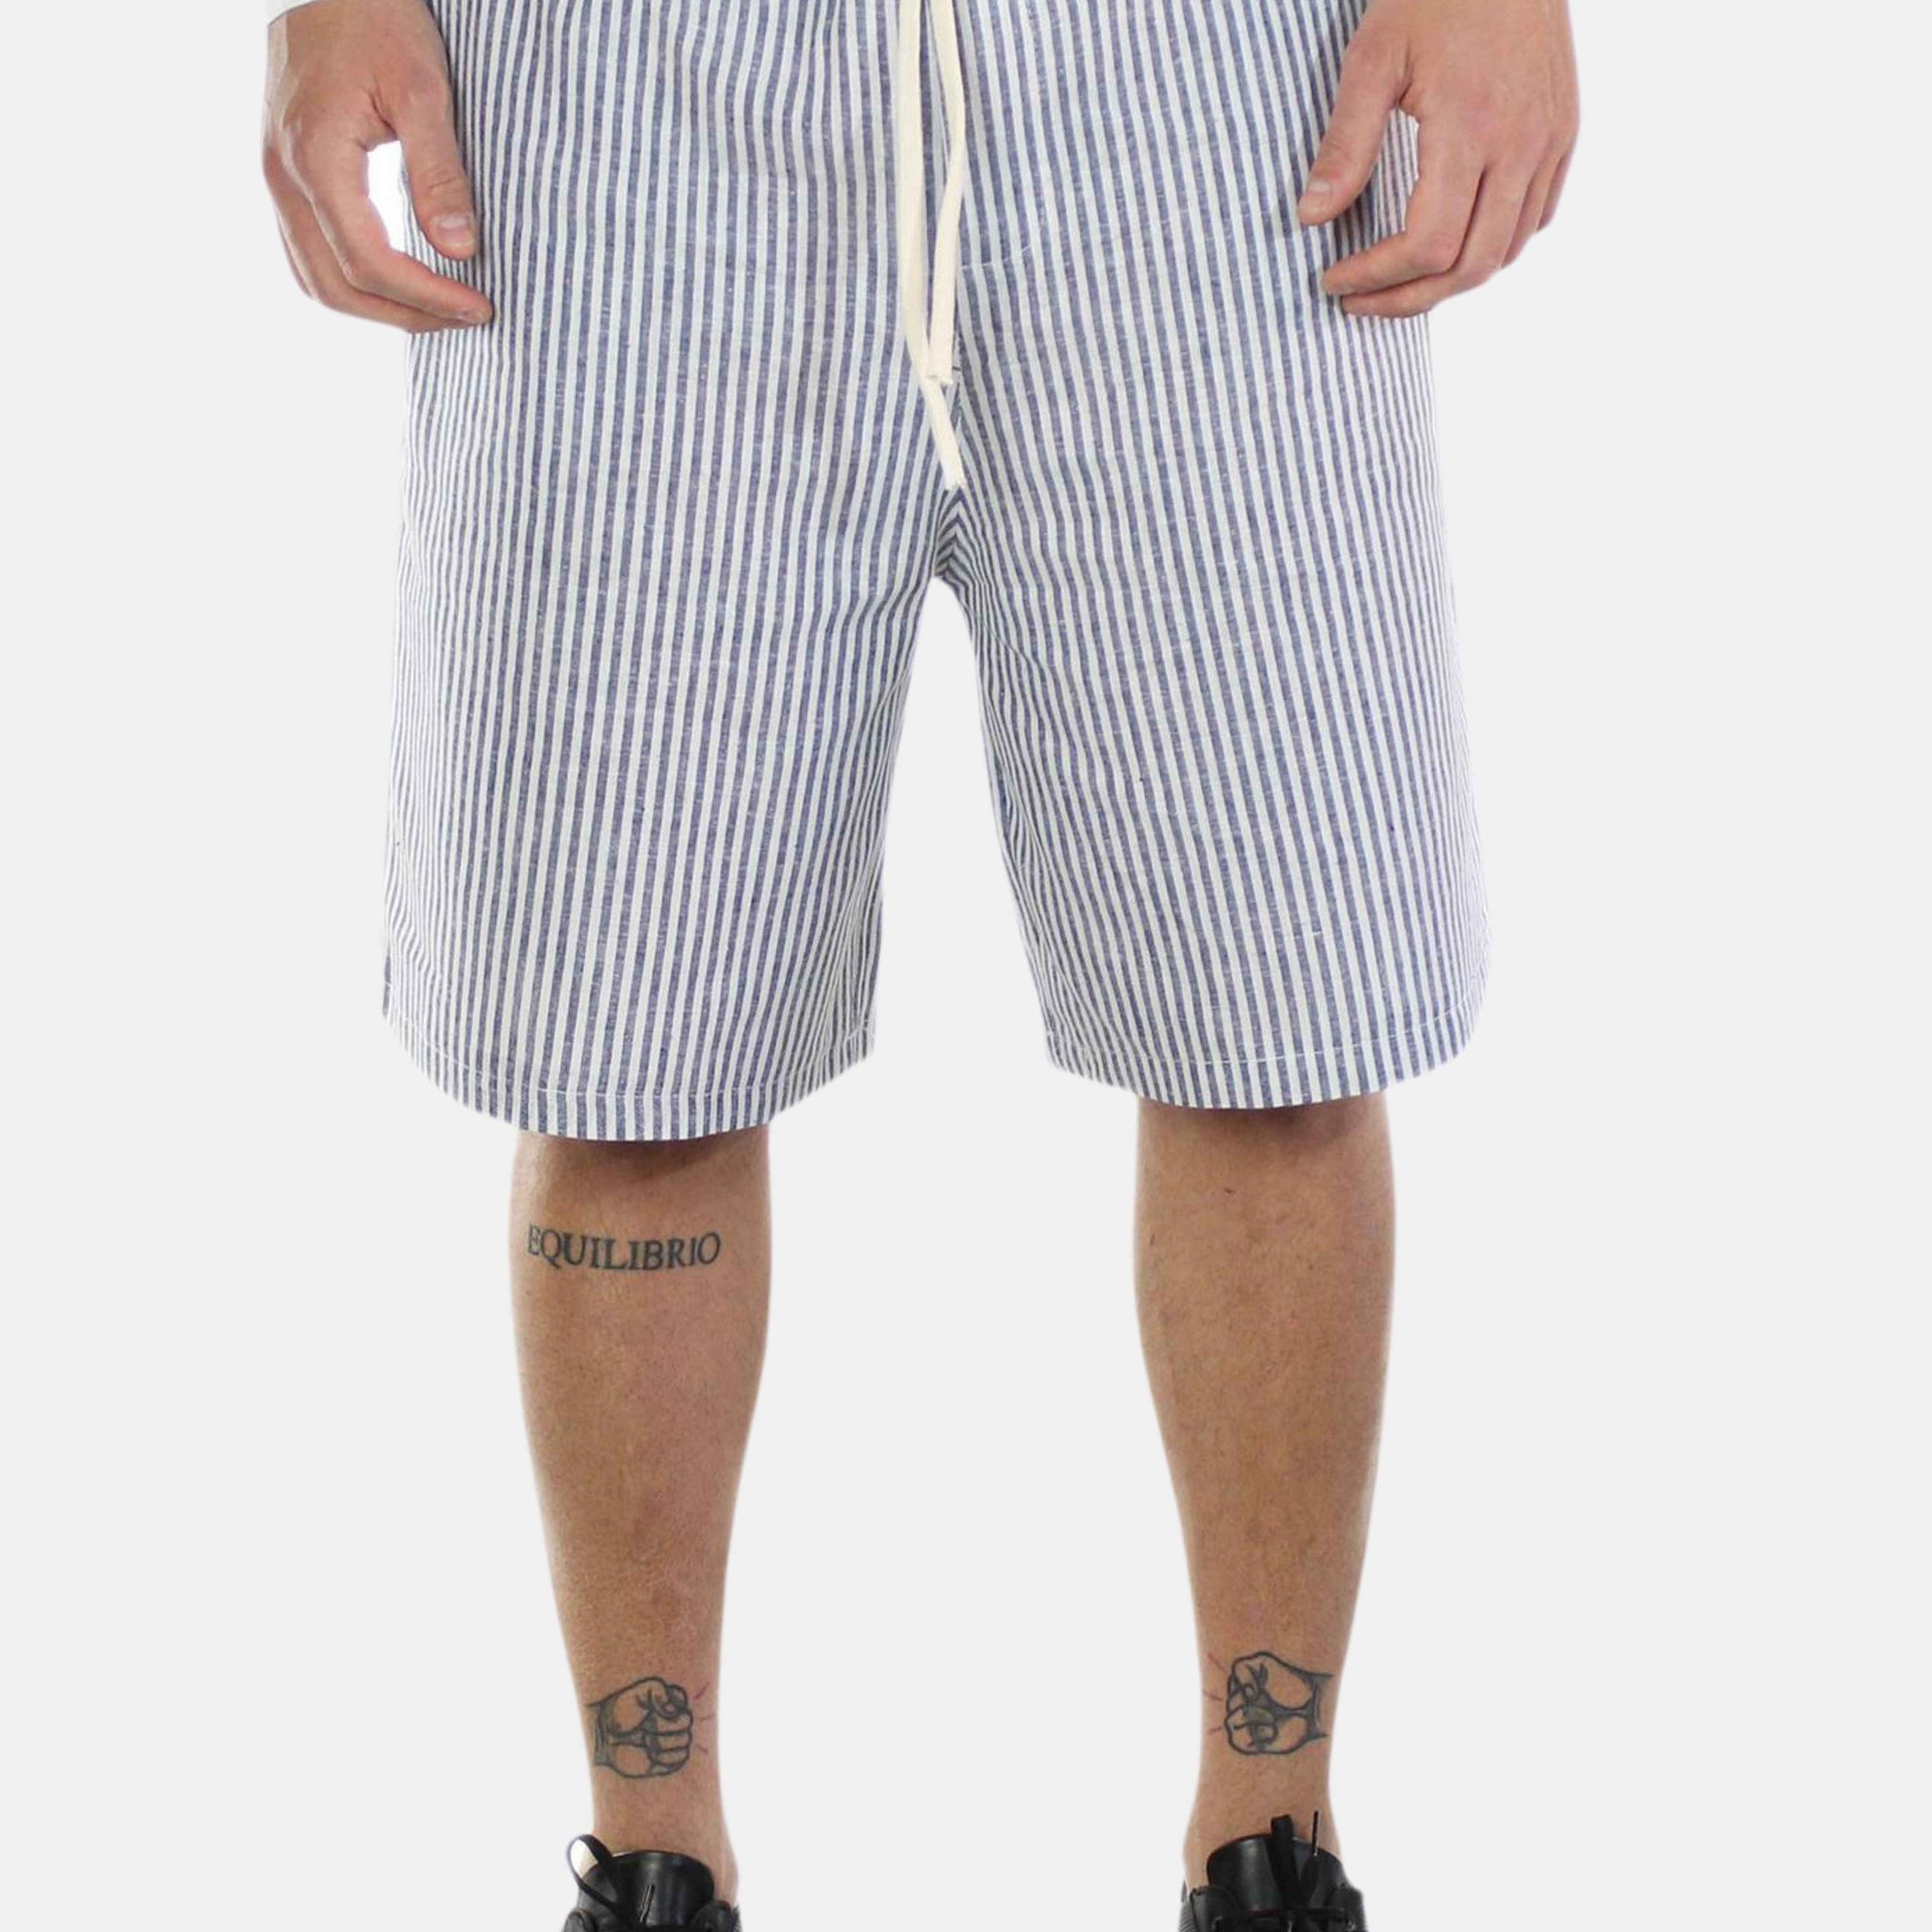 Bermuda with elastic band in striped linen